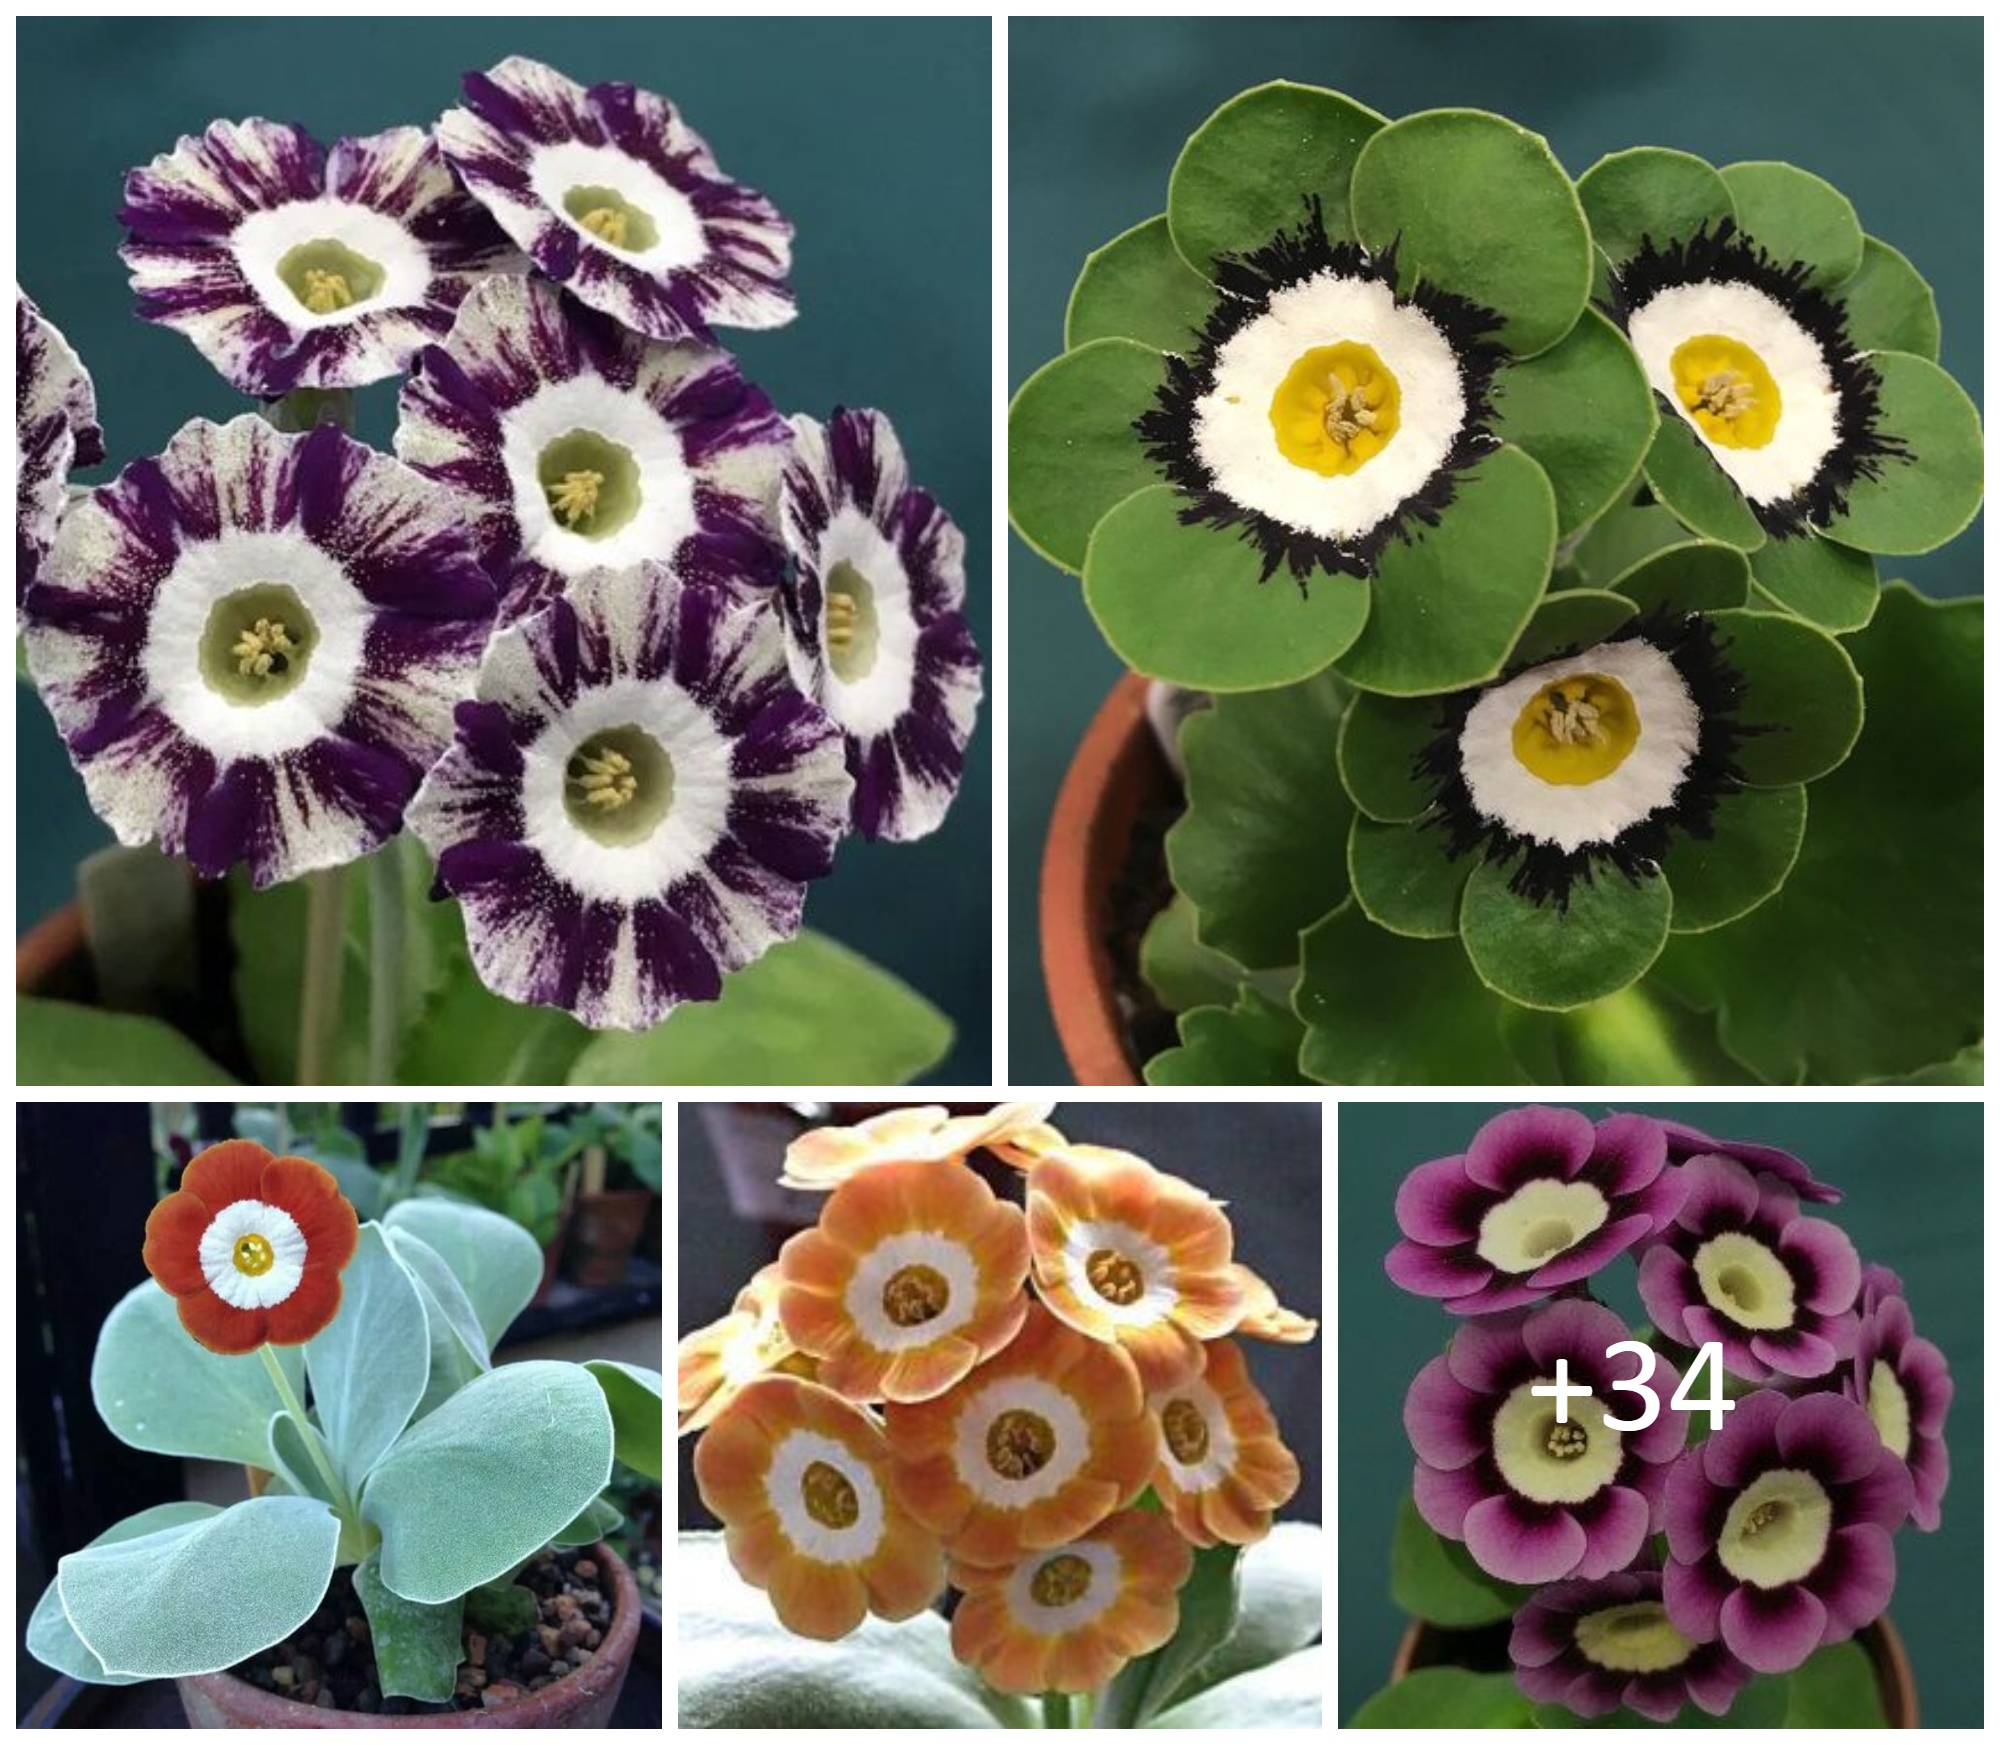 How to grow perfect auriculas